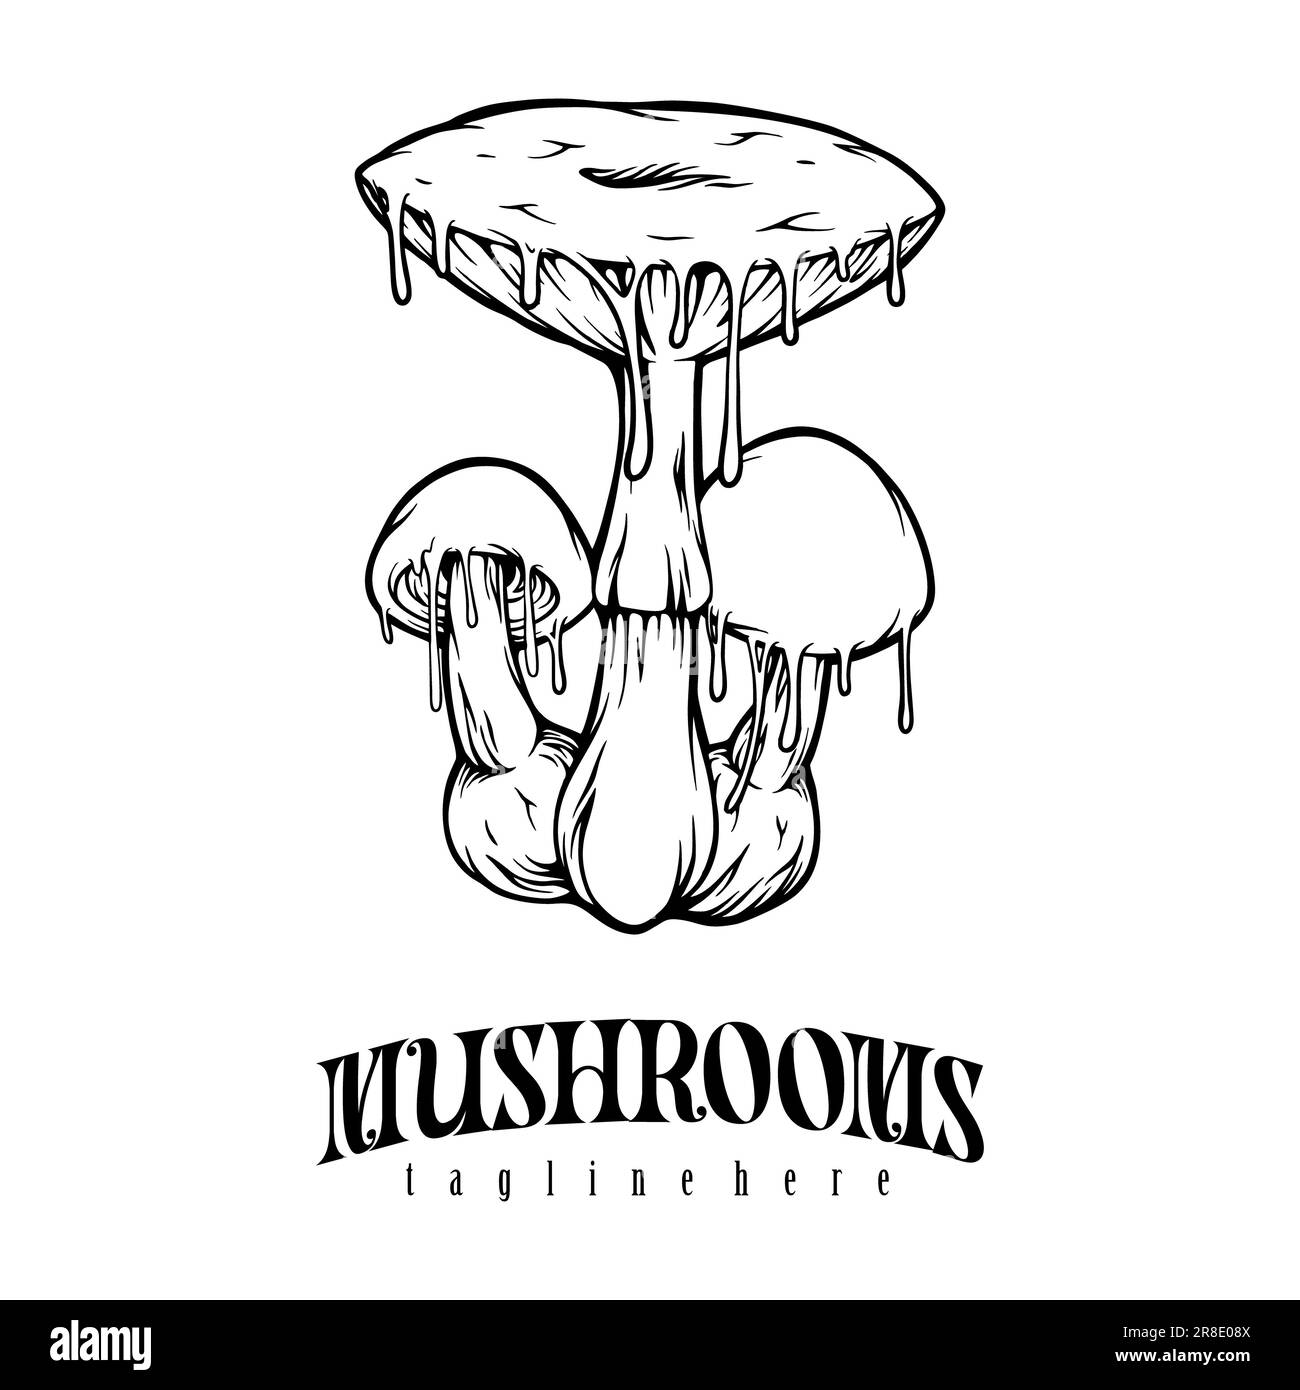 Dripping magic mushrooms psychedelic logo illustration monochrome vector illustrations for your work logo, merchandise t-shirt, stickers and label des Stock Photo